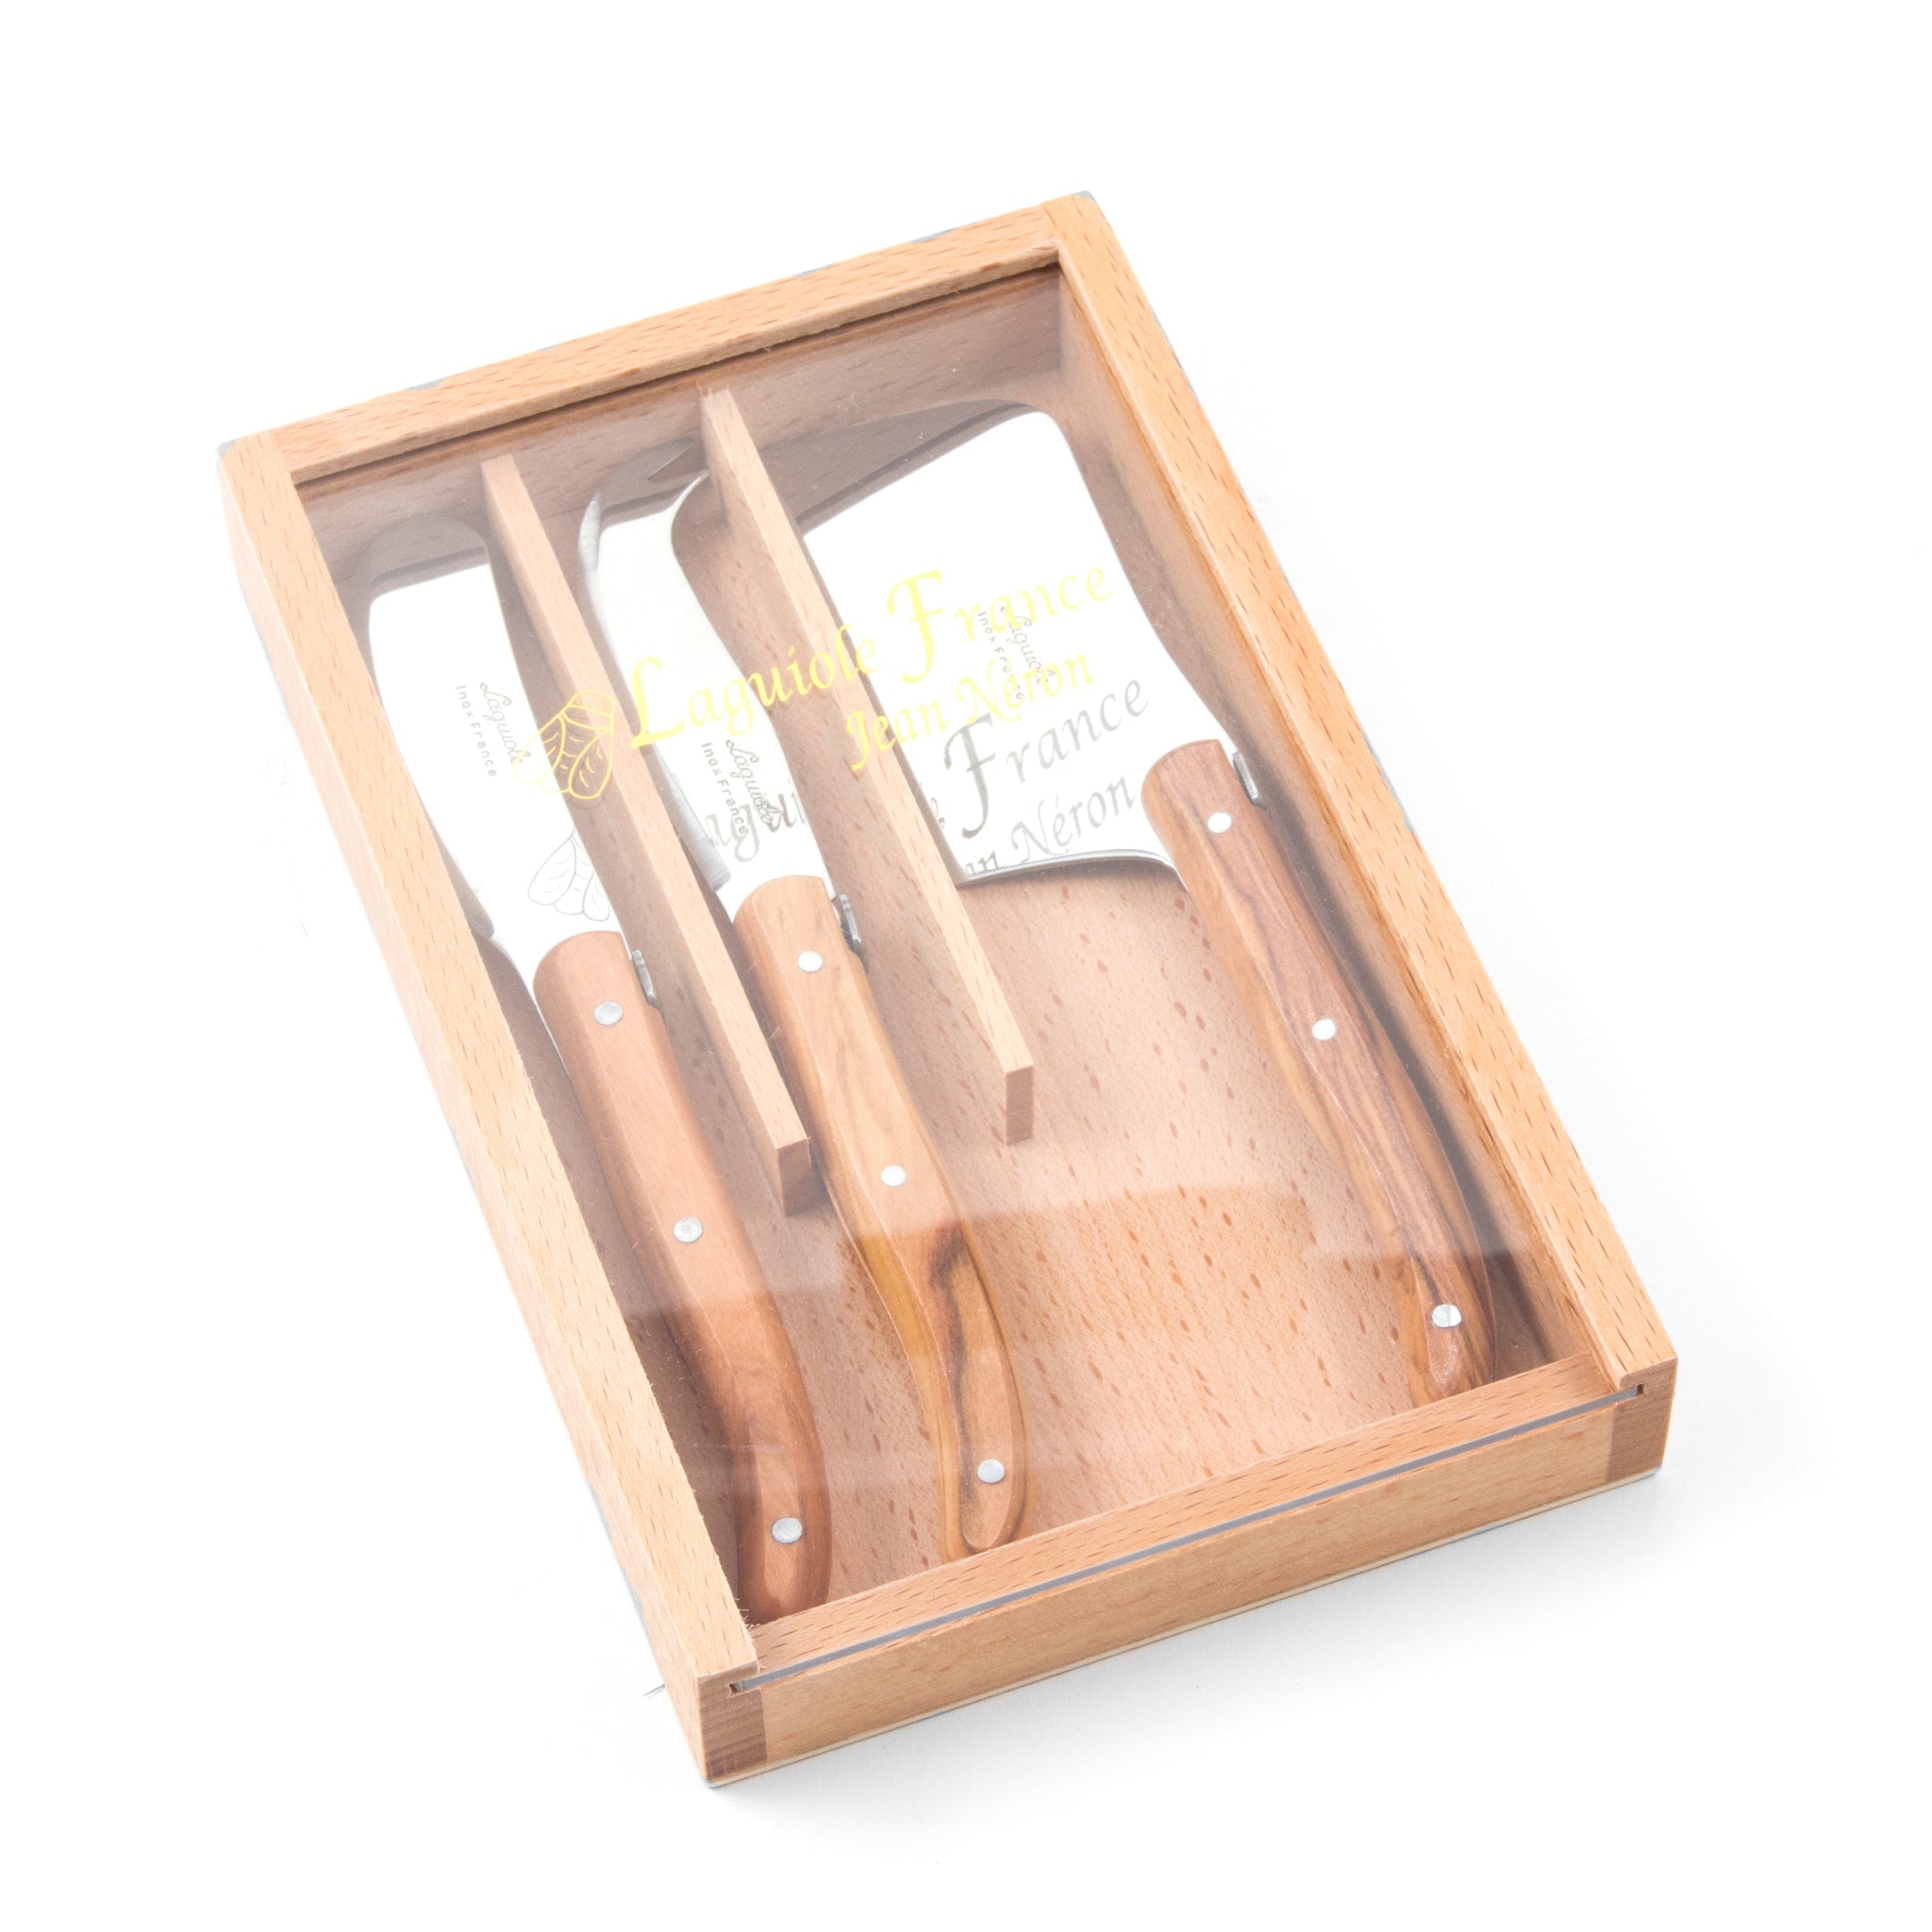 Laguiole 3 Piece Olivewood Mini Cheese Set in Wooden Box - French Dry Goods